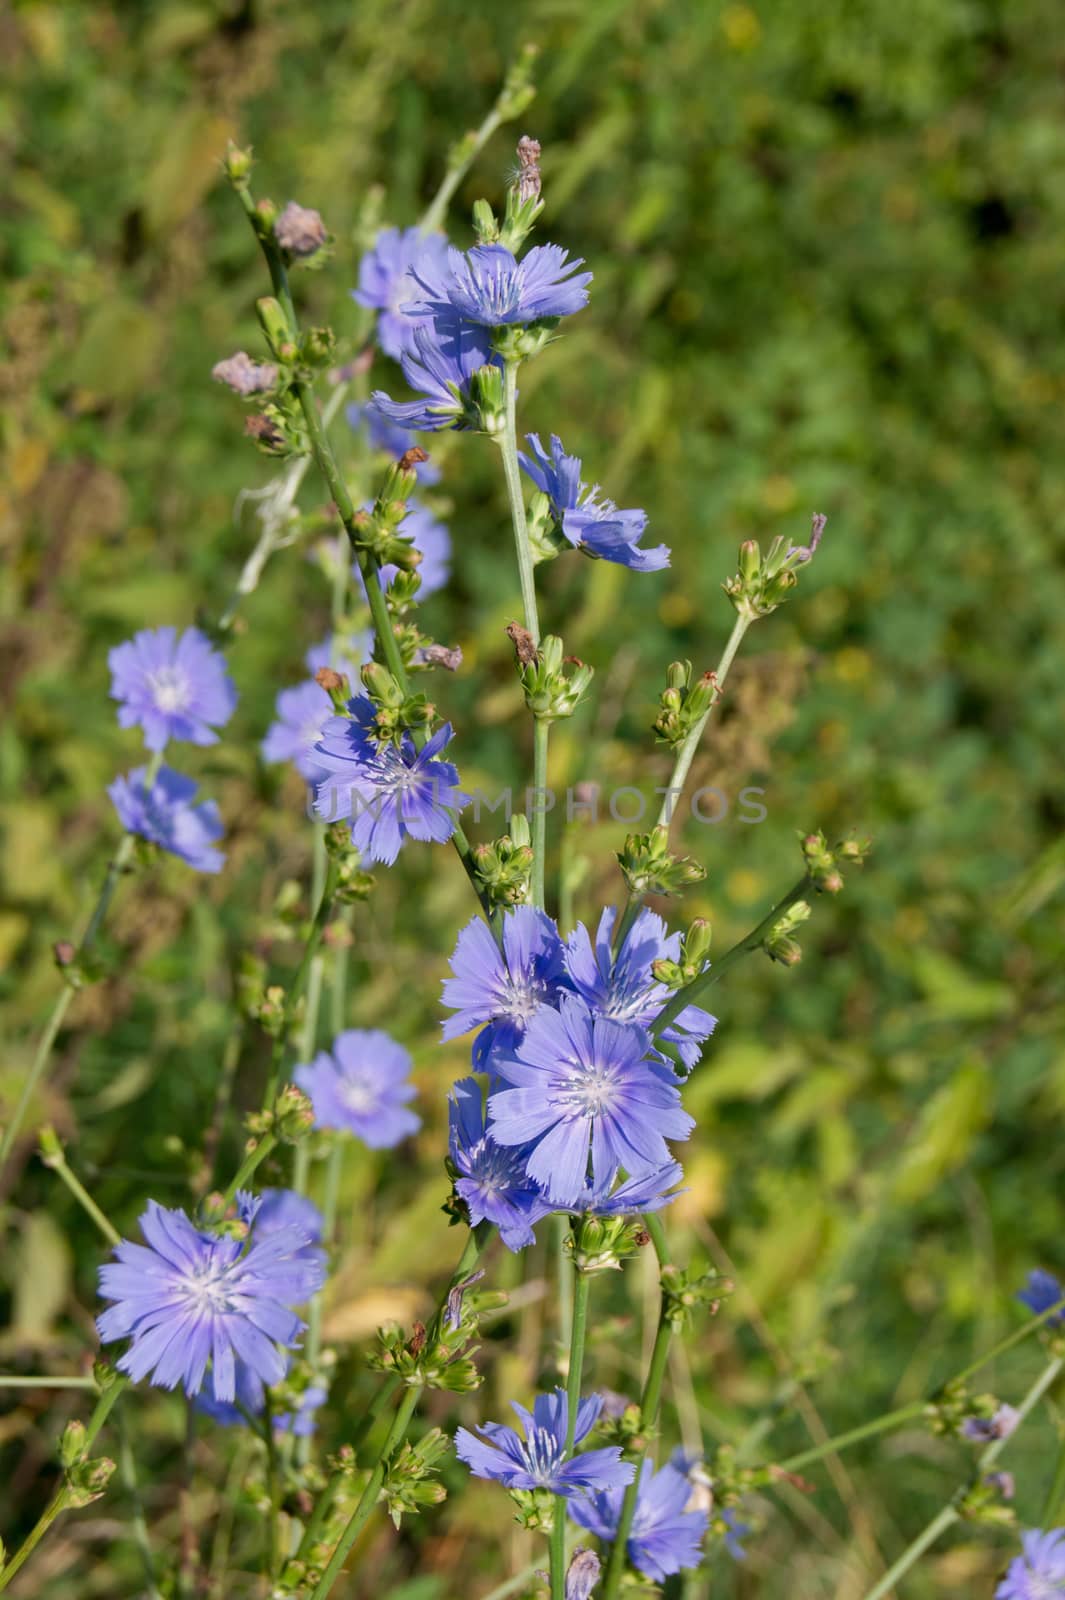 The chicory (Cichorium intybus) fields, ditches plants.